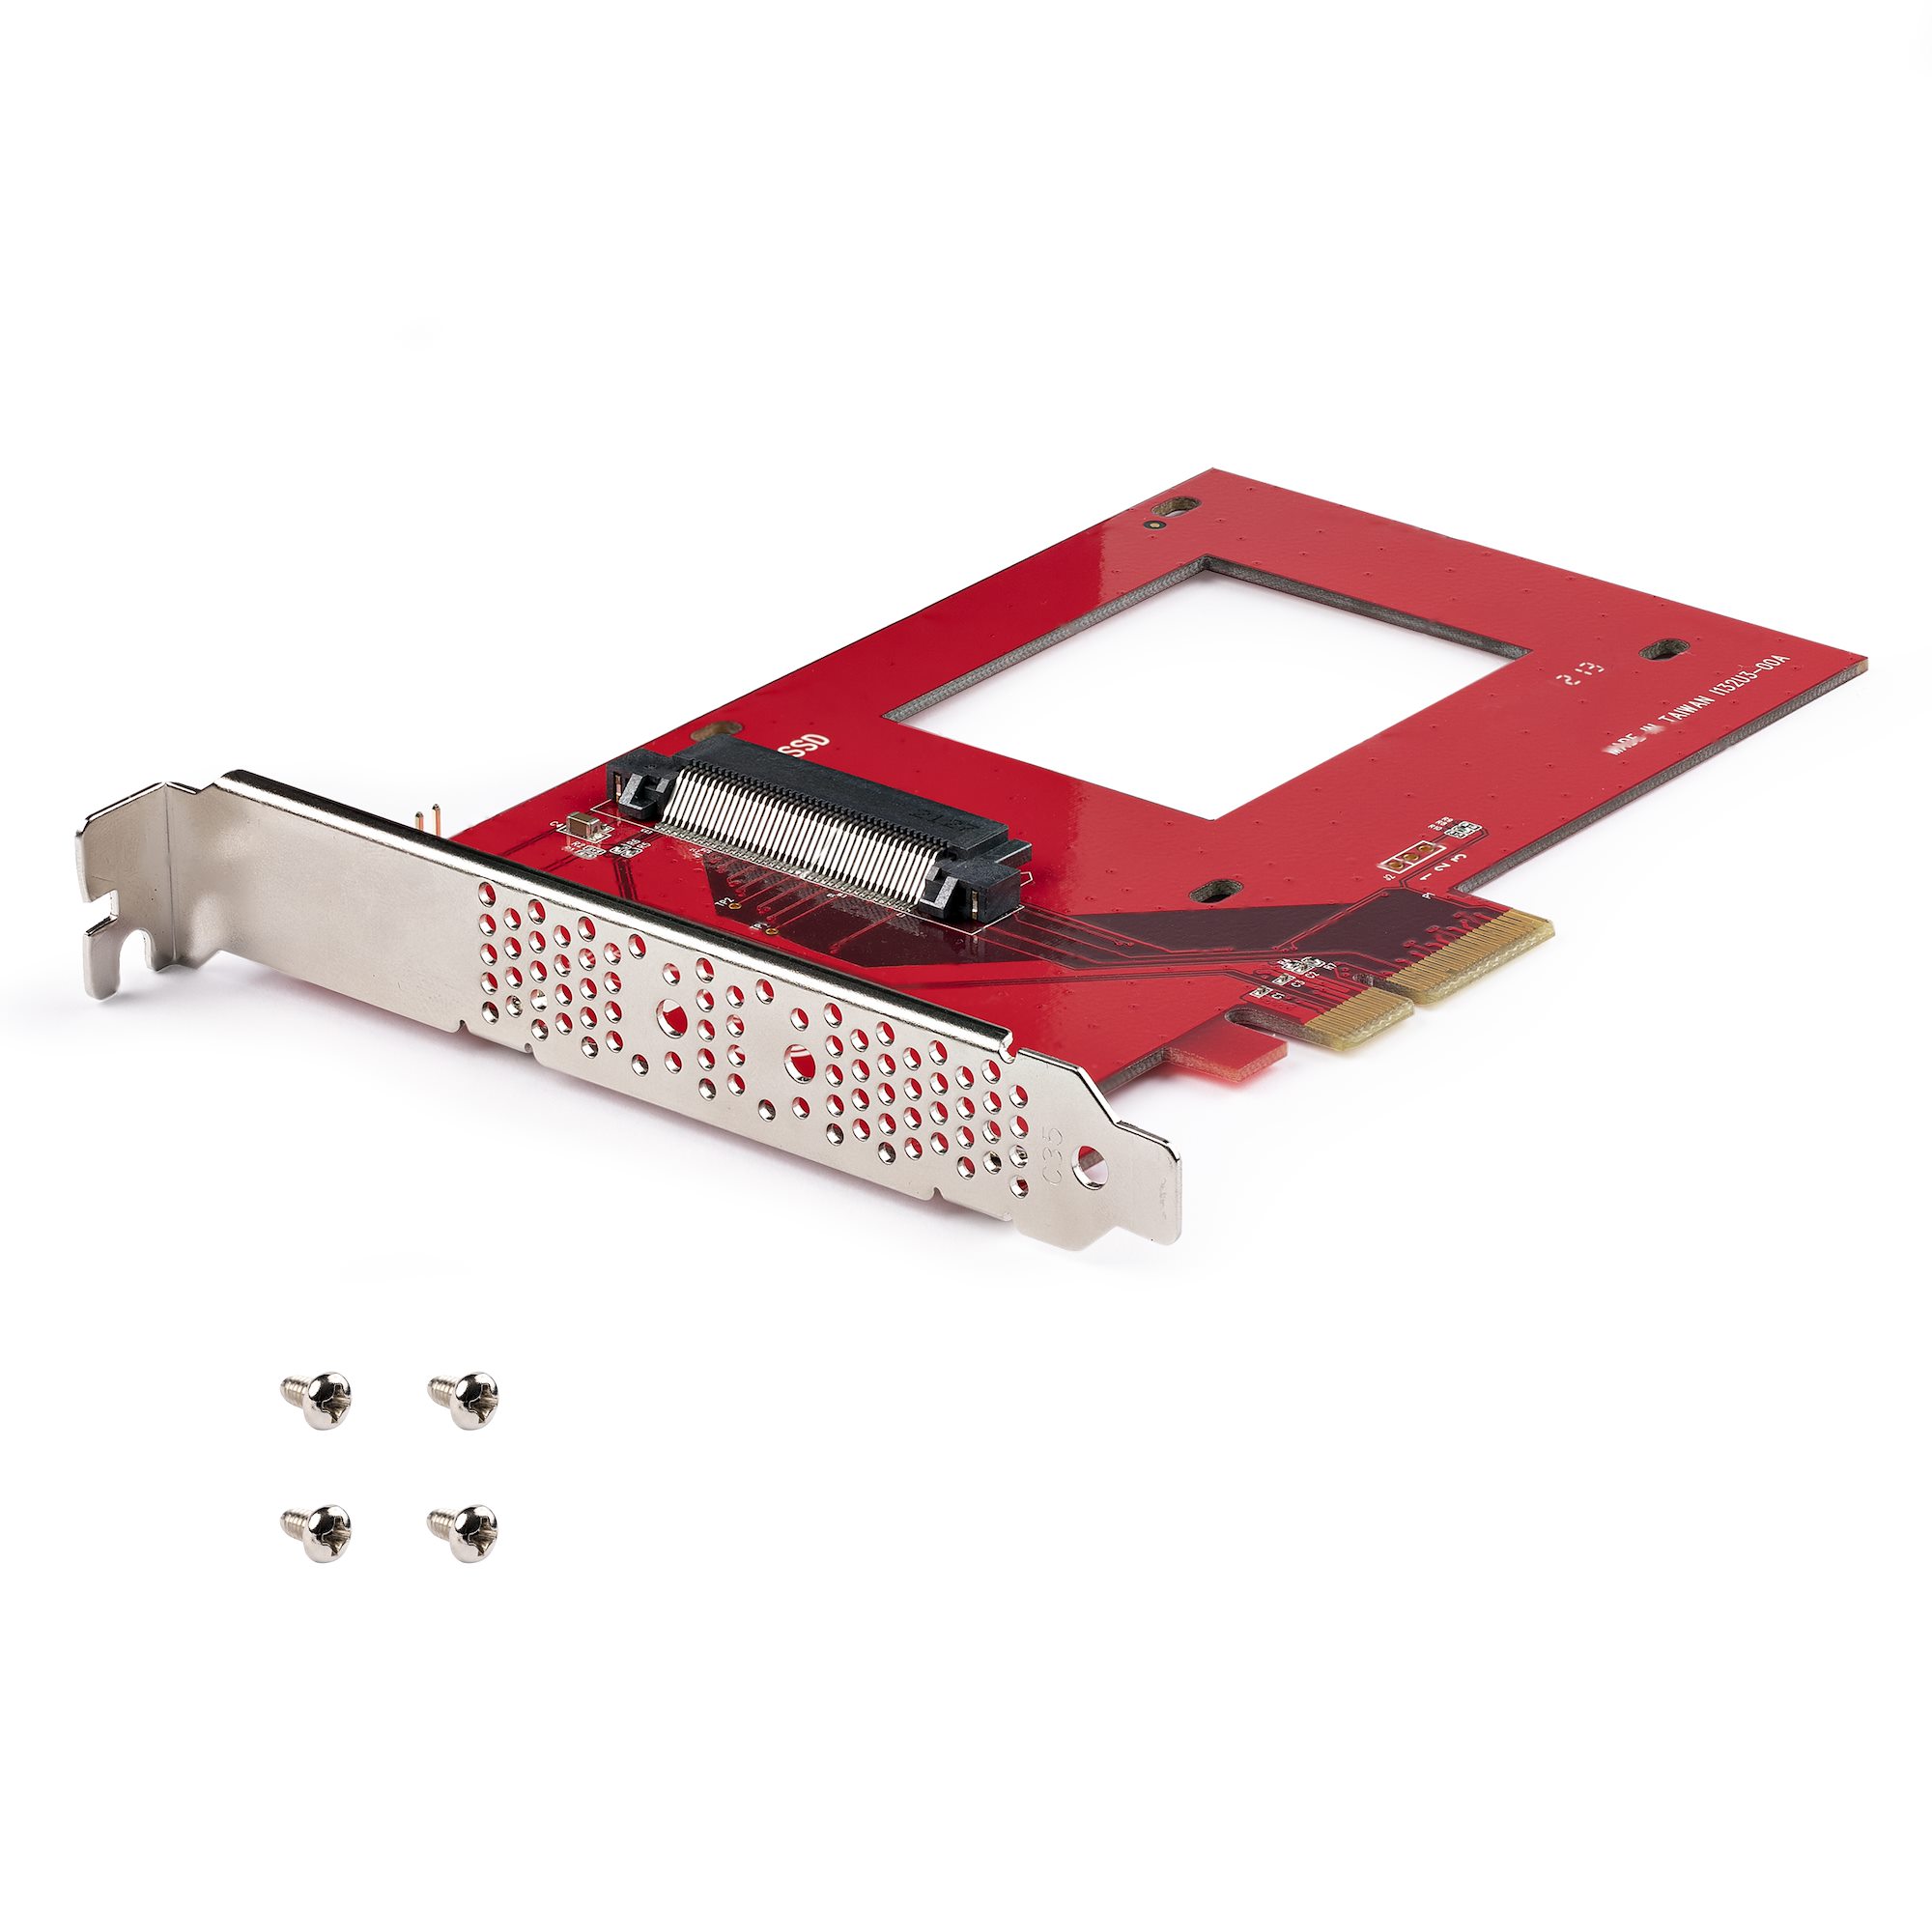 U.3 to PCIe Adapter Card For U.3 SSDs - Drive Adapters and Drive Converters, Hard Drive Accessories